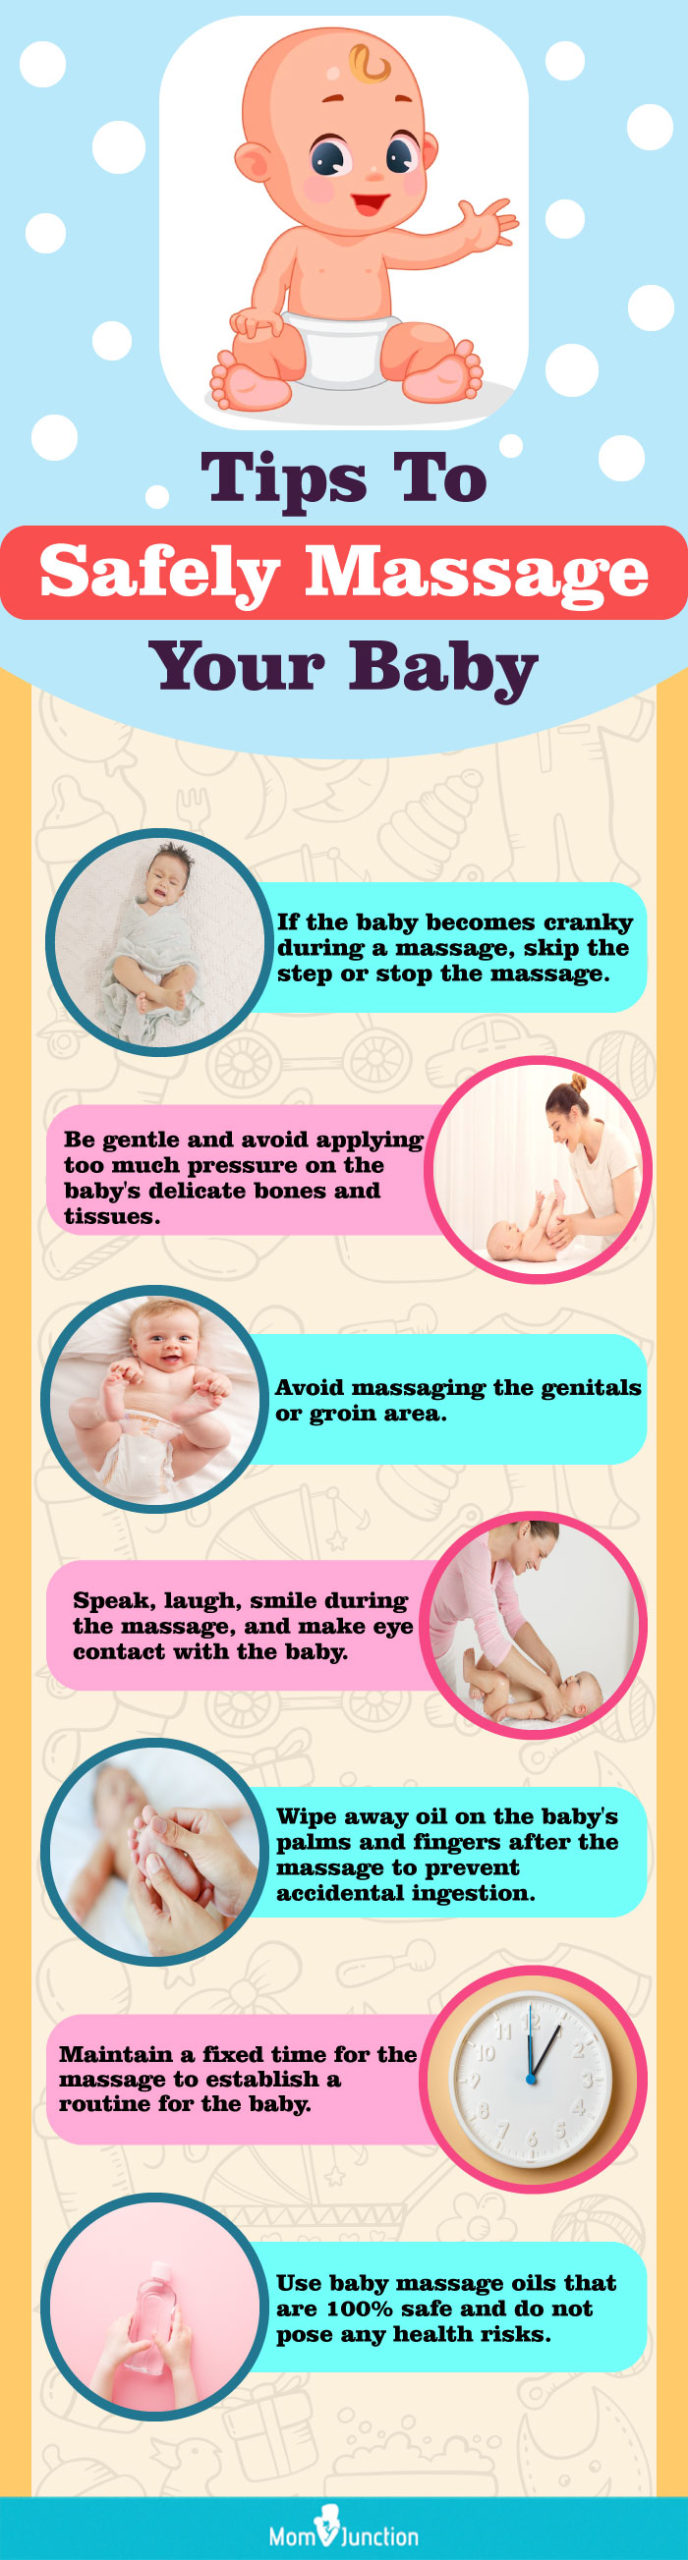 tips to safely massage your baby [infographic]